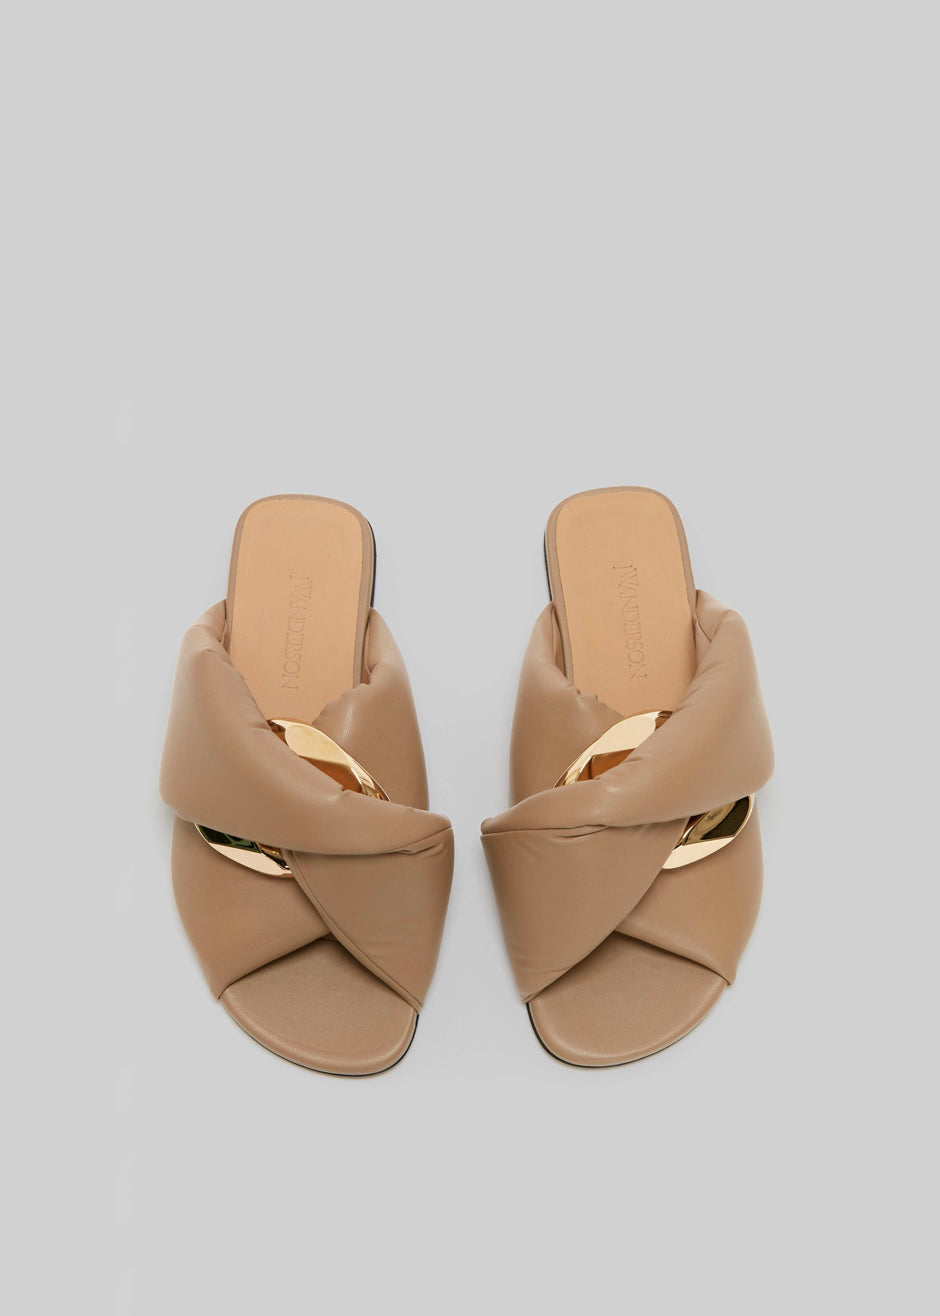 JW Anderson Chain Flat Sandals - Taupe